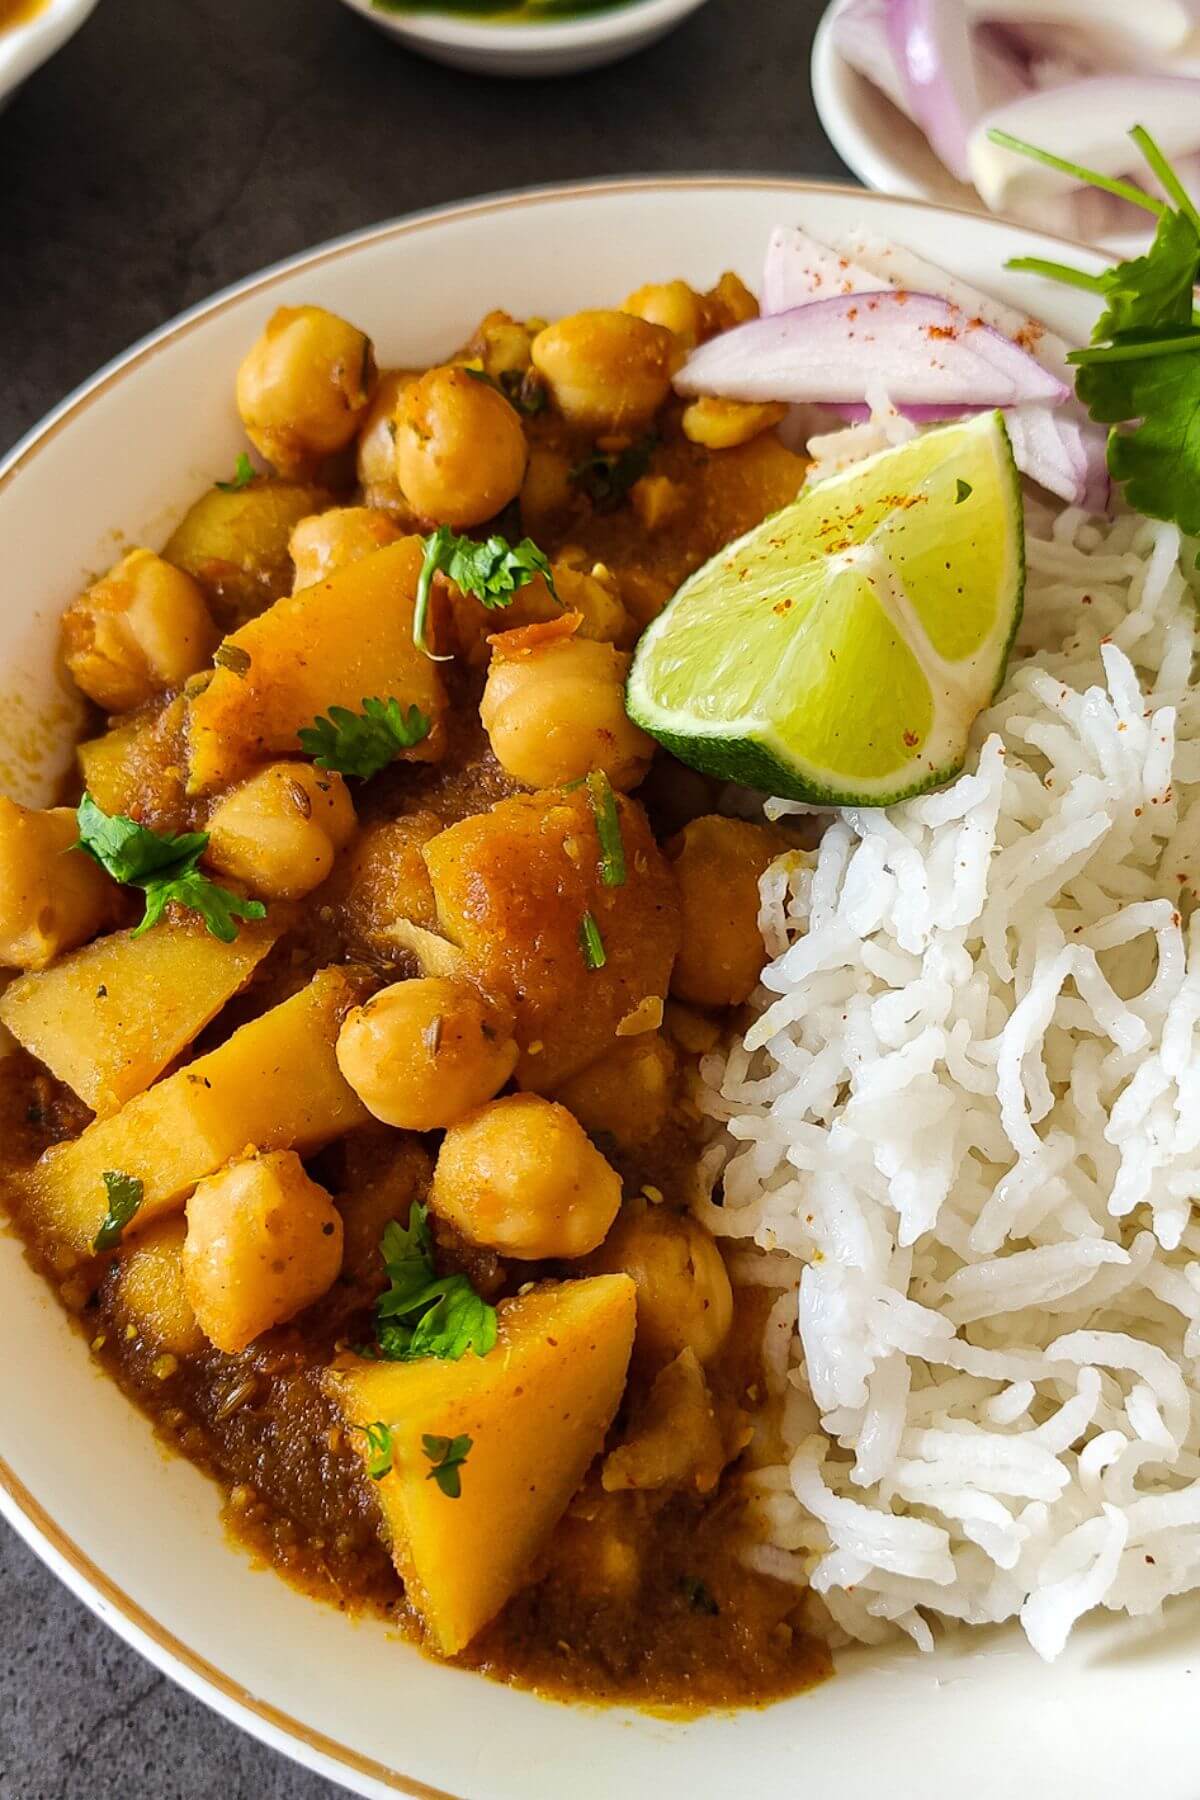 curried potatoes and chickpeas served in a bowl with rice, a slice of lime and onion slices.